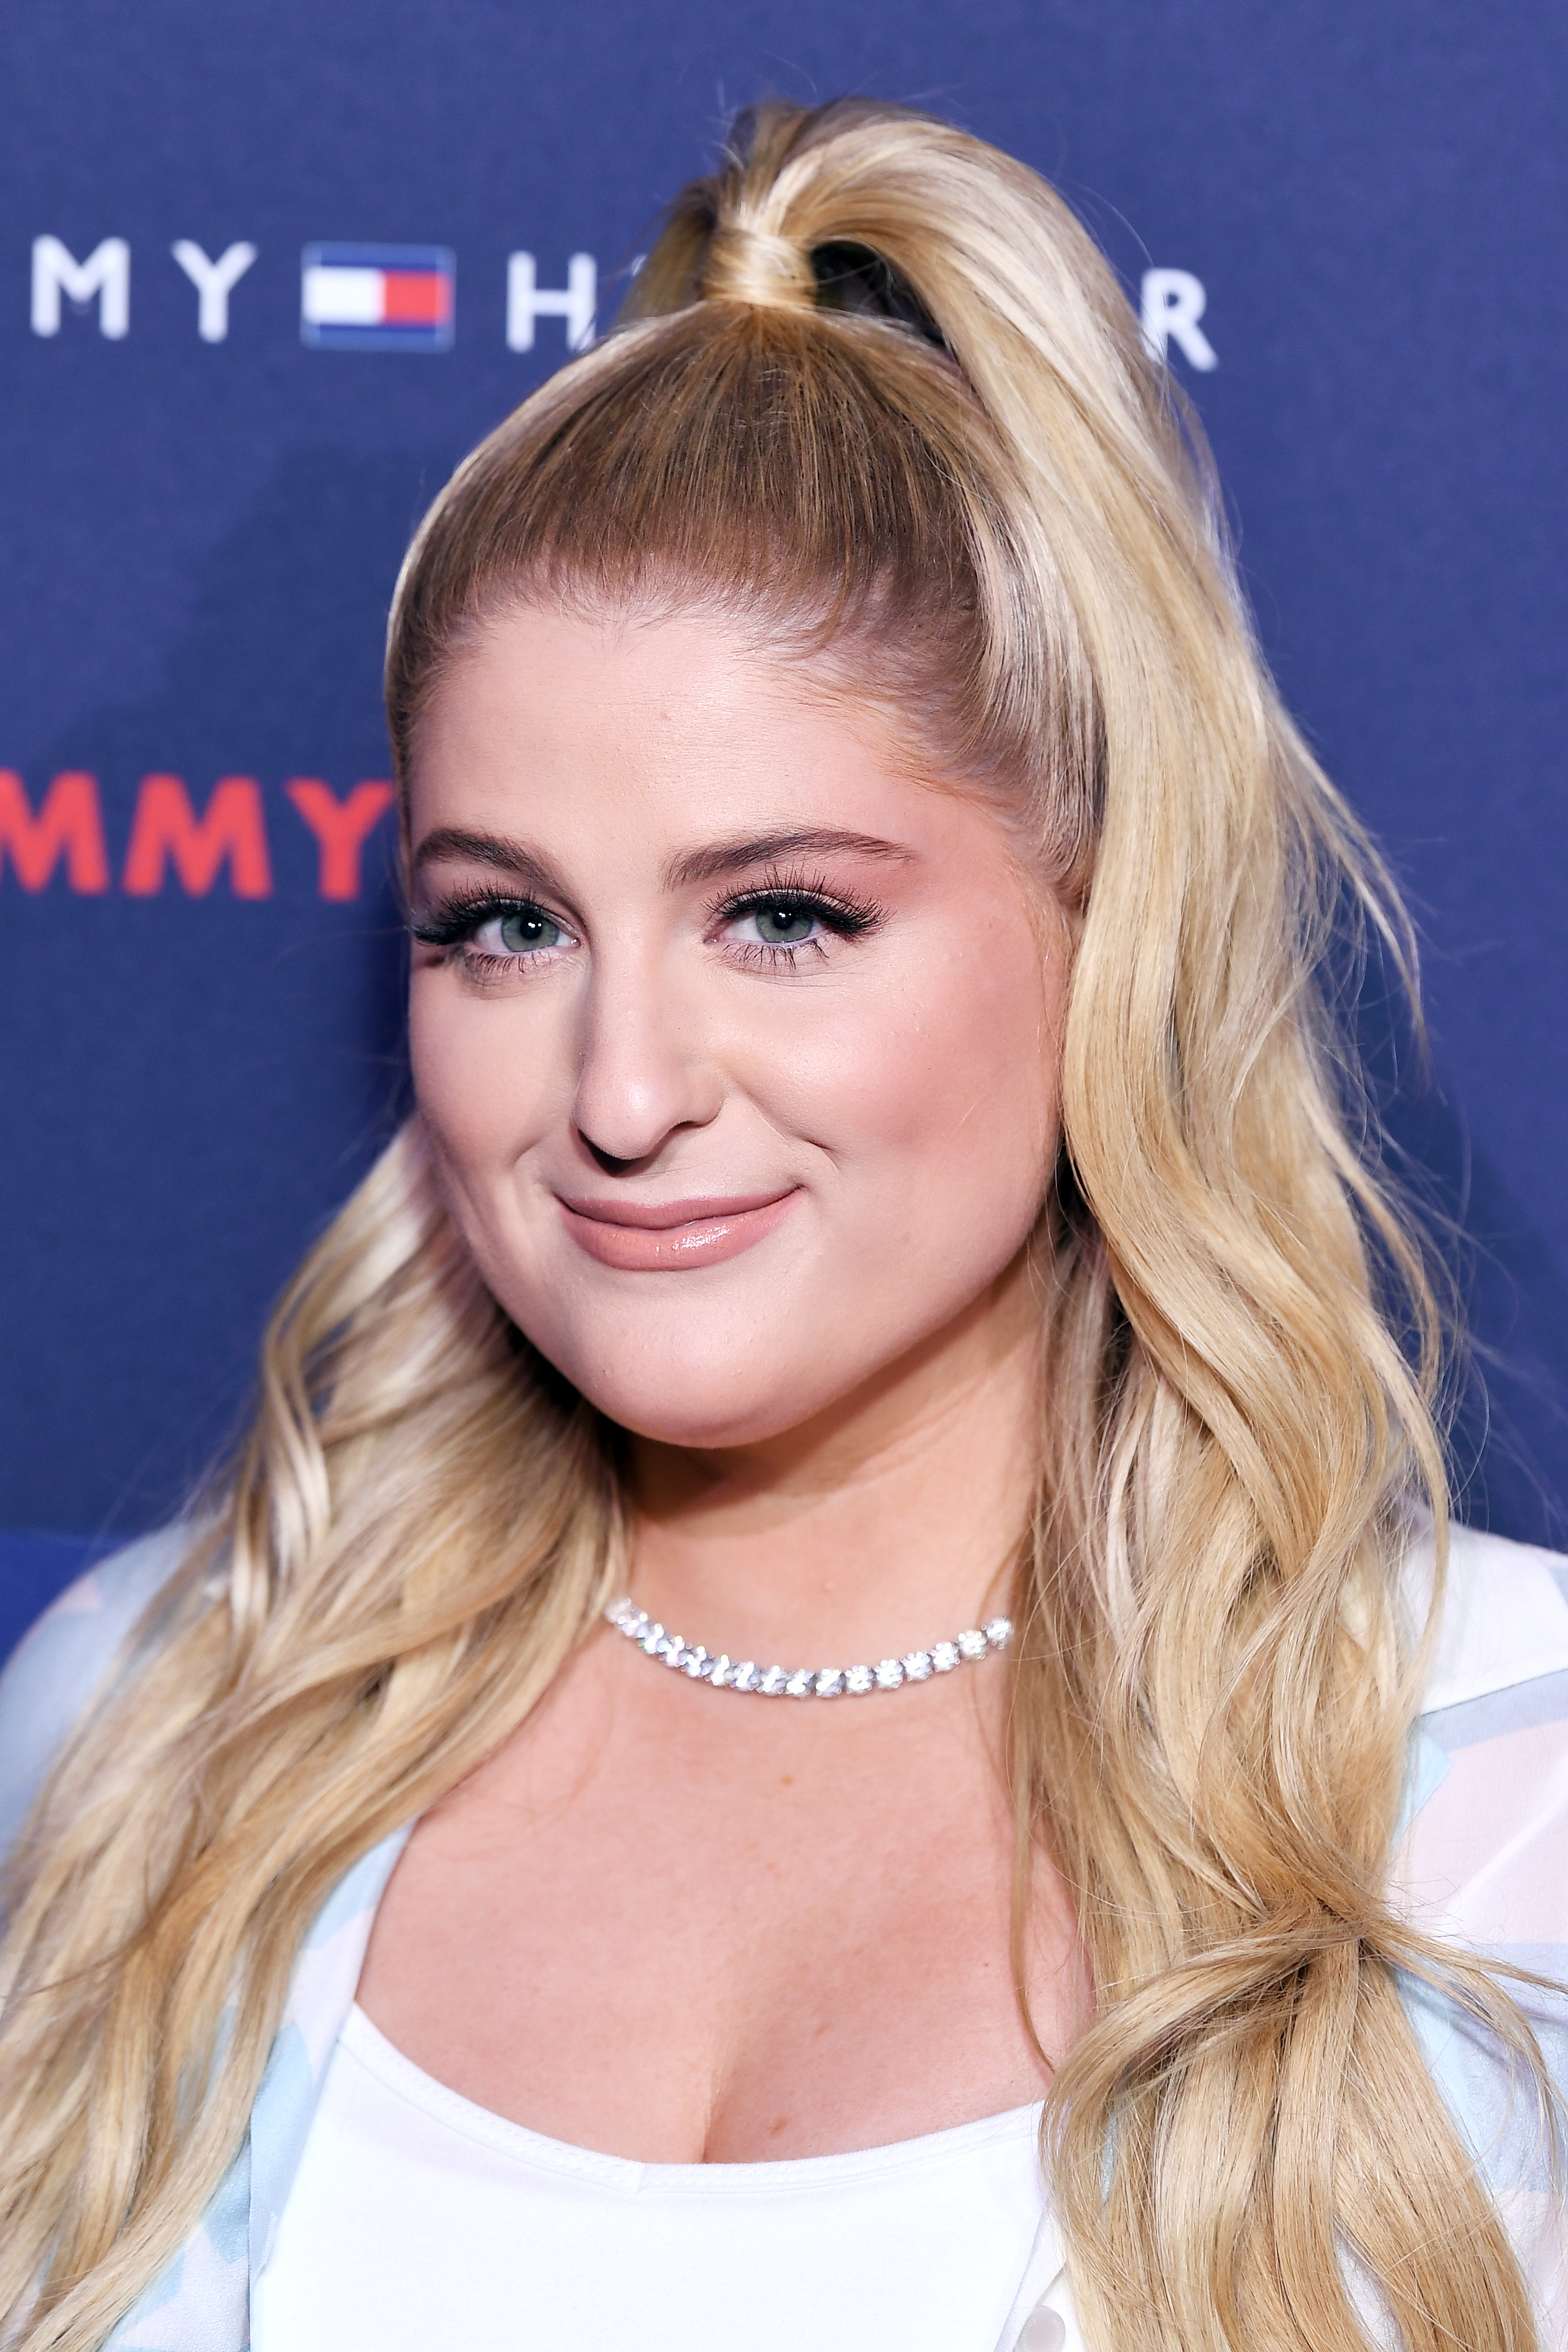 Meghan Trainor Fights Body Image With Song (WATCH) - Good News Network